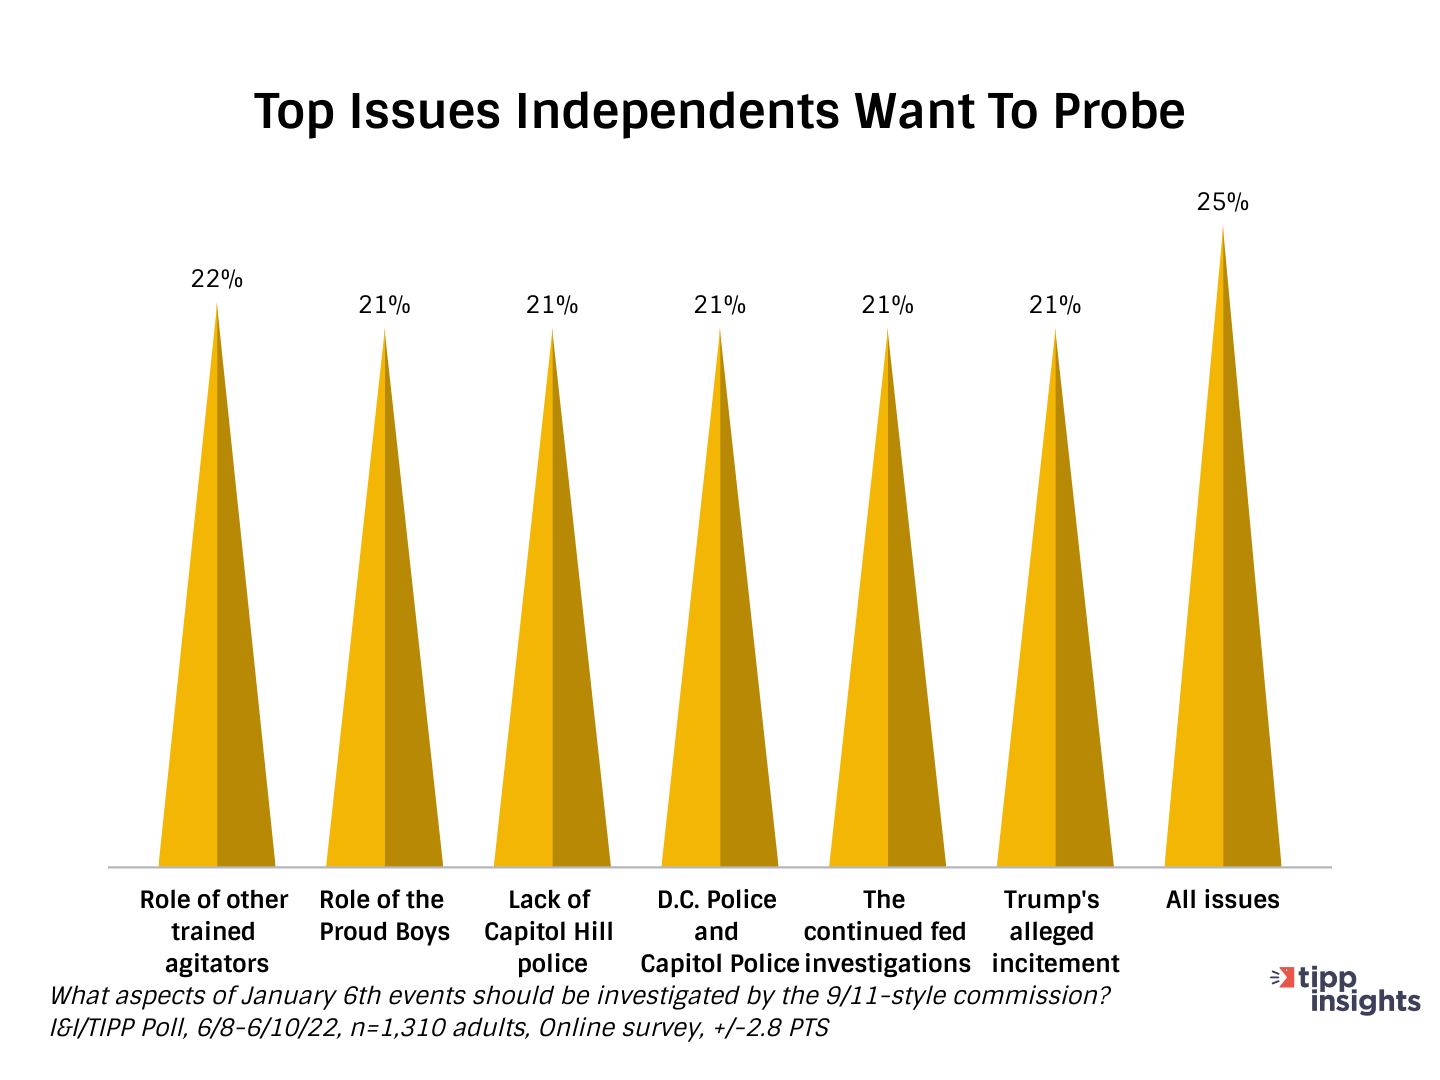 I&I/TIPP Poll results: What are the top issues independents want to probe in the January 6th investigation?